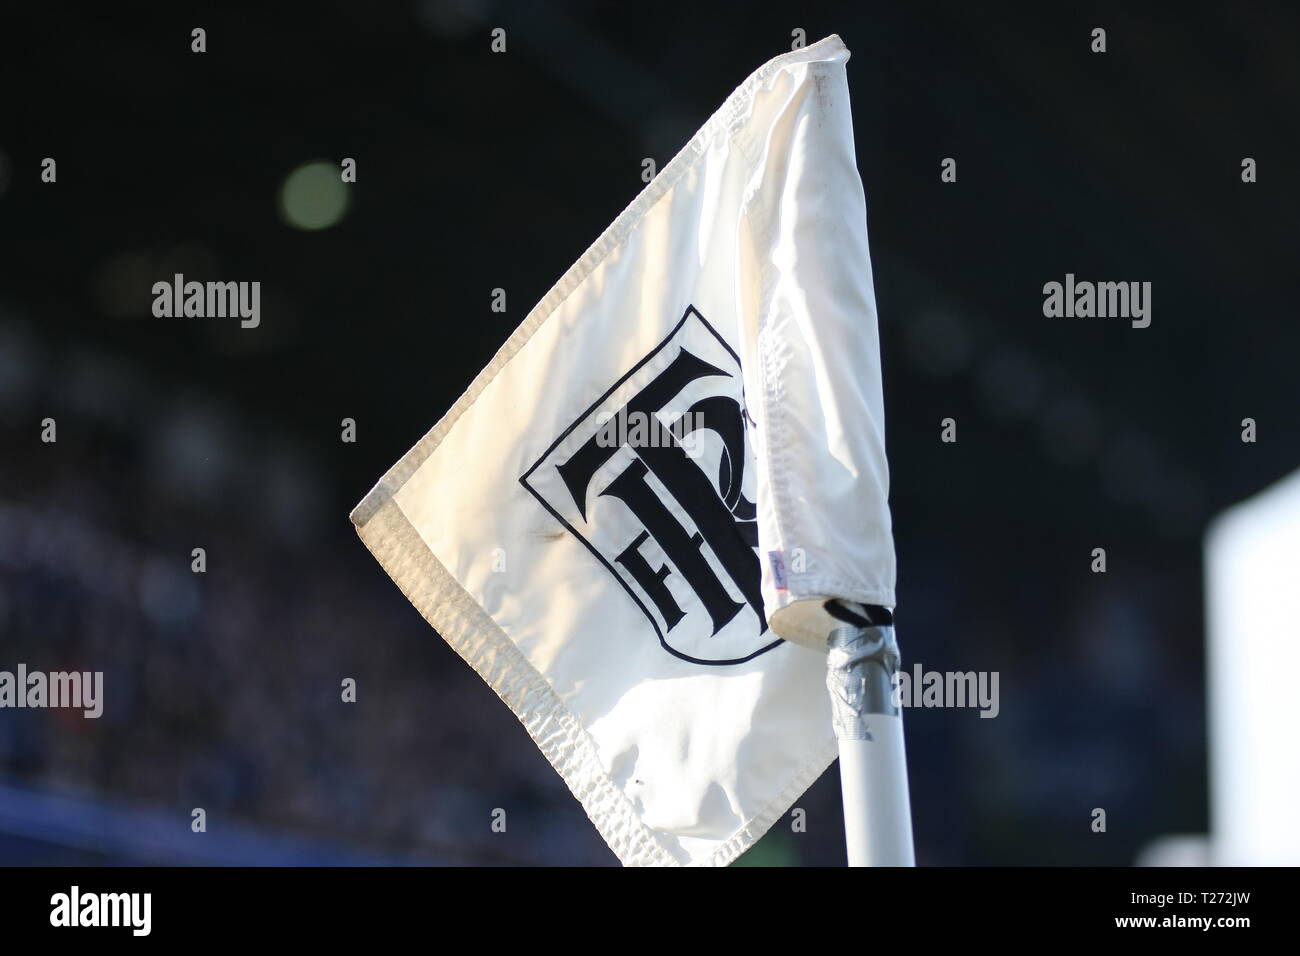 Birkenhead, Wirral, UK. 30th March, 2019. The Tranmere Rovers club badge on the corner flag during the EFL League Two match with Carlisle United at Prenton Park which Tranmere Rovers won 3-0. Stock Photo